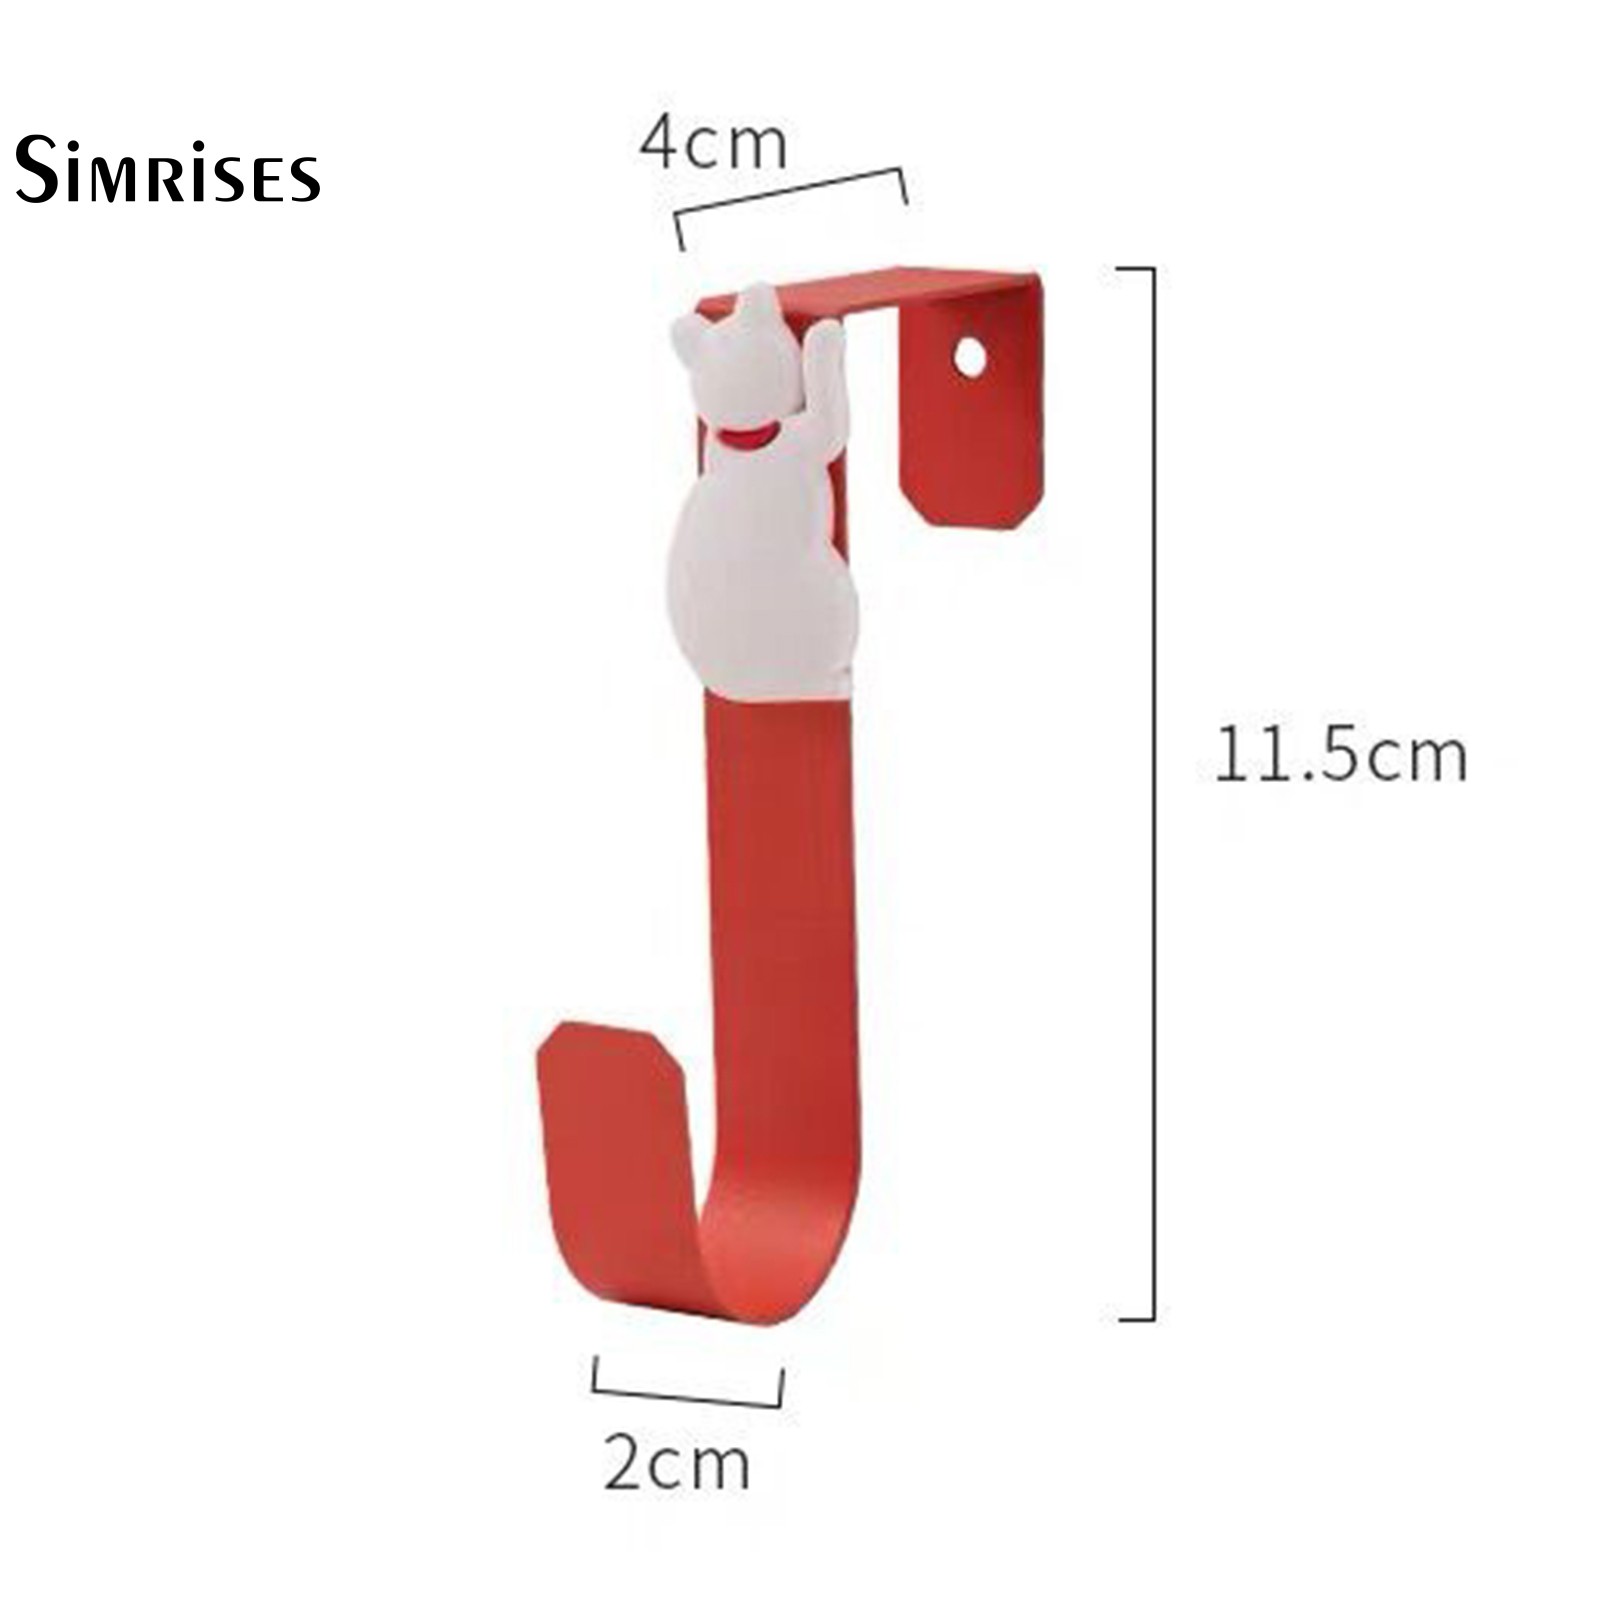 Simrises Home  Life Home Accessories Hanger Hanging Hanger Hooks Save Space for Bedroom